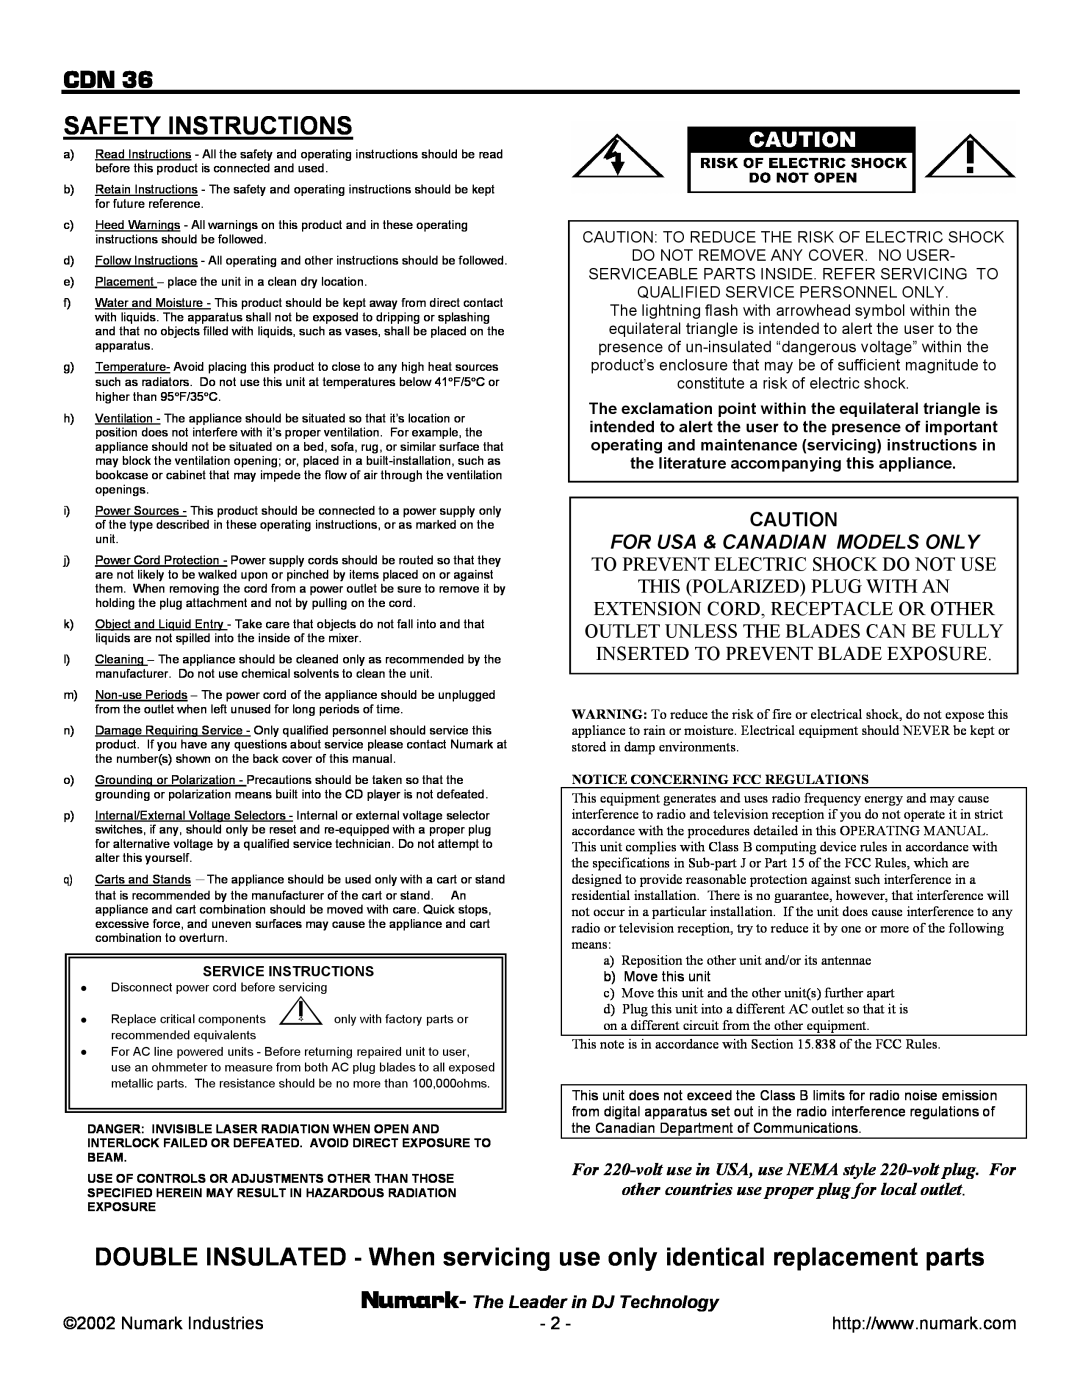 Numark Industries CDN 36 Cdn Safety Instructions, For Usa & Canadian Models Only, To Prevent Electric Shock Do Not Use 